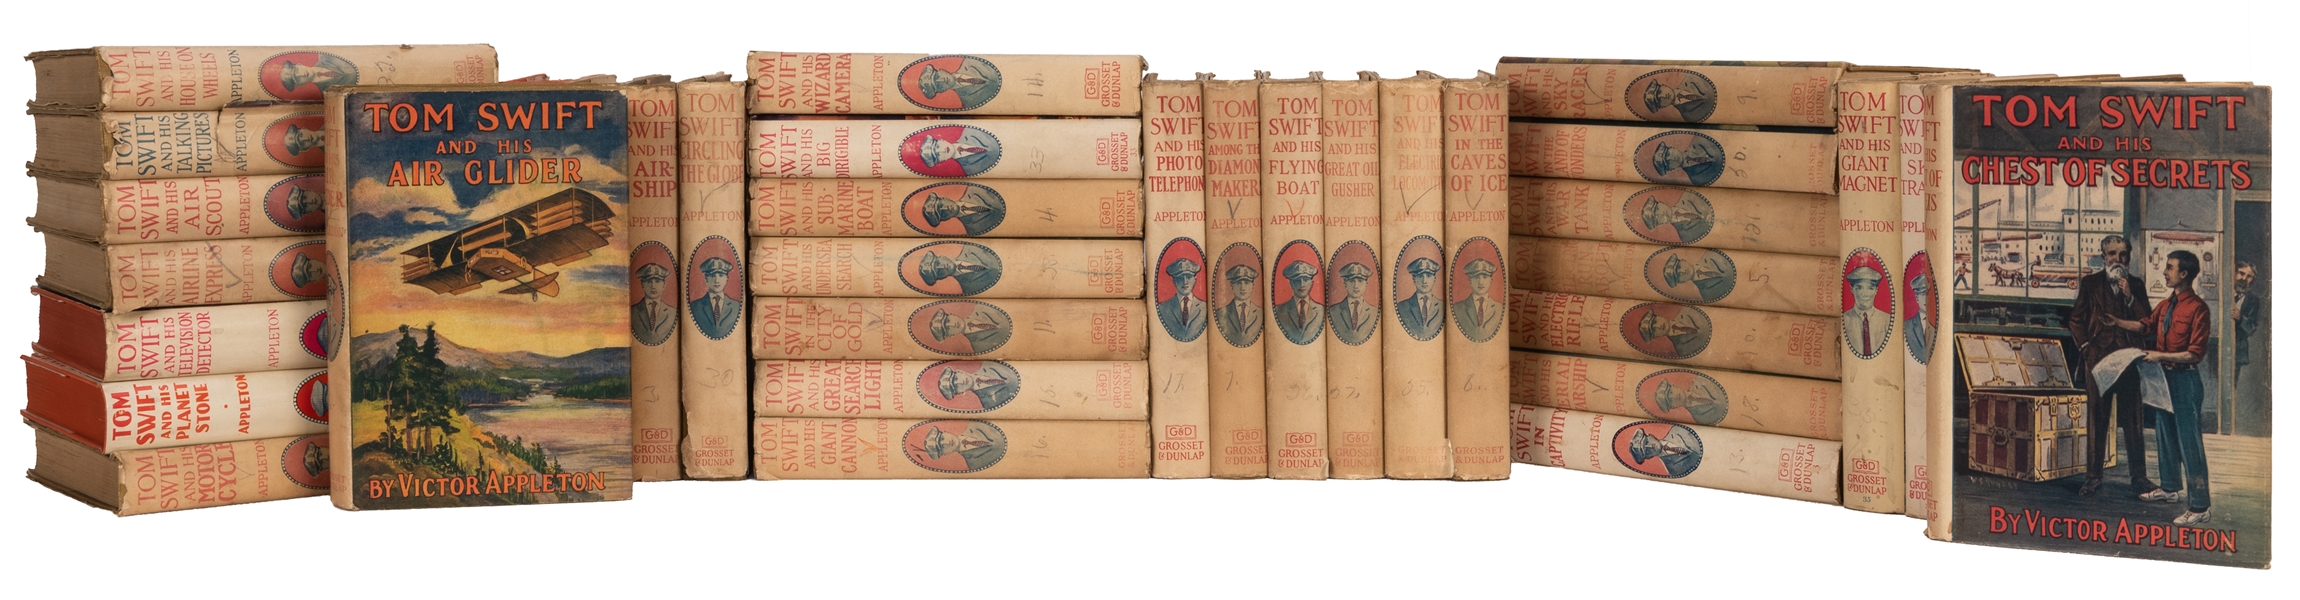 Group of 38 Tom Swift Titles in Dust-Jackets. 